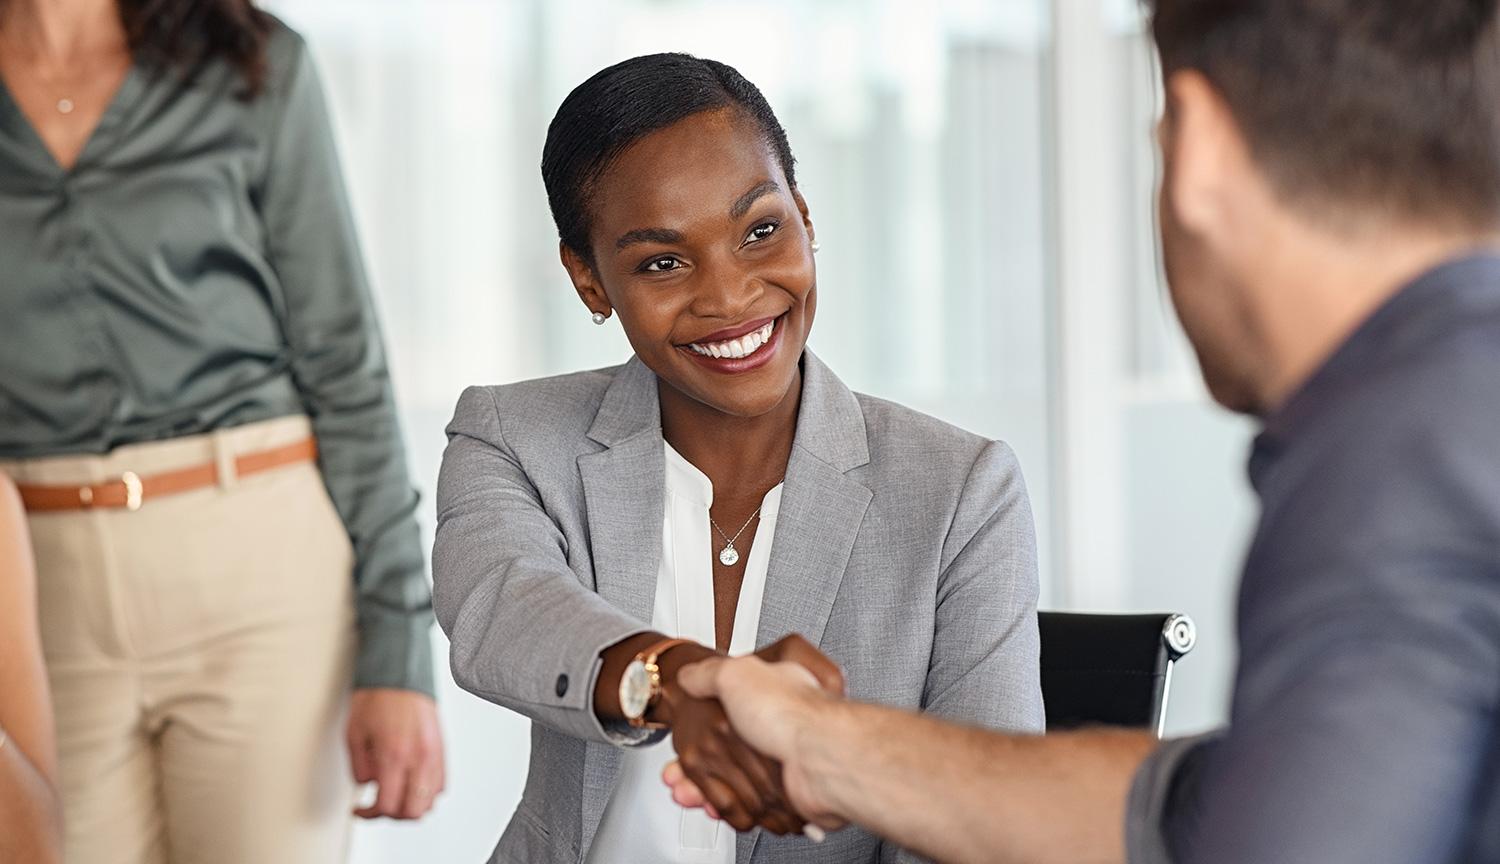 A professional woman smiling while shaking hands with a colleague in a business meeting.